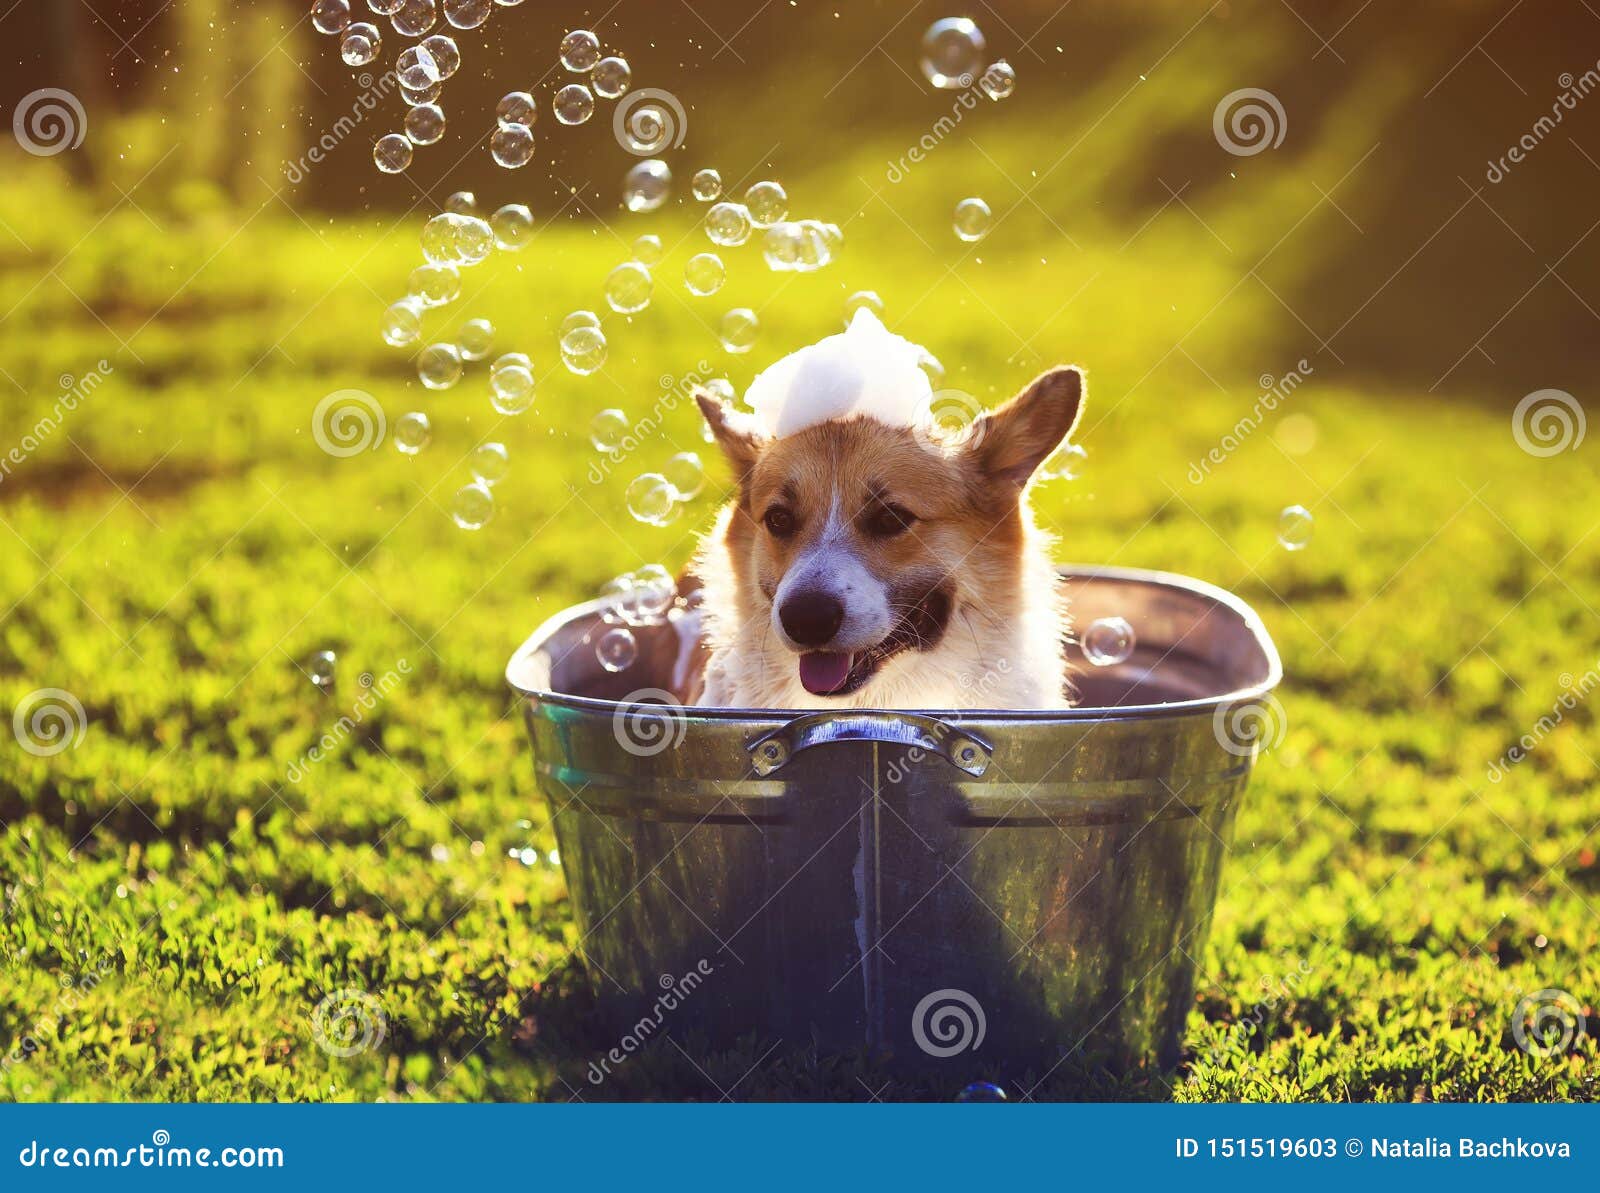 Cute Funny Puppy Dog Standing in a Metal Basin Washed on the Street in ...